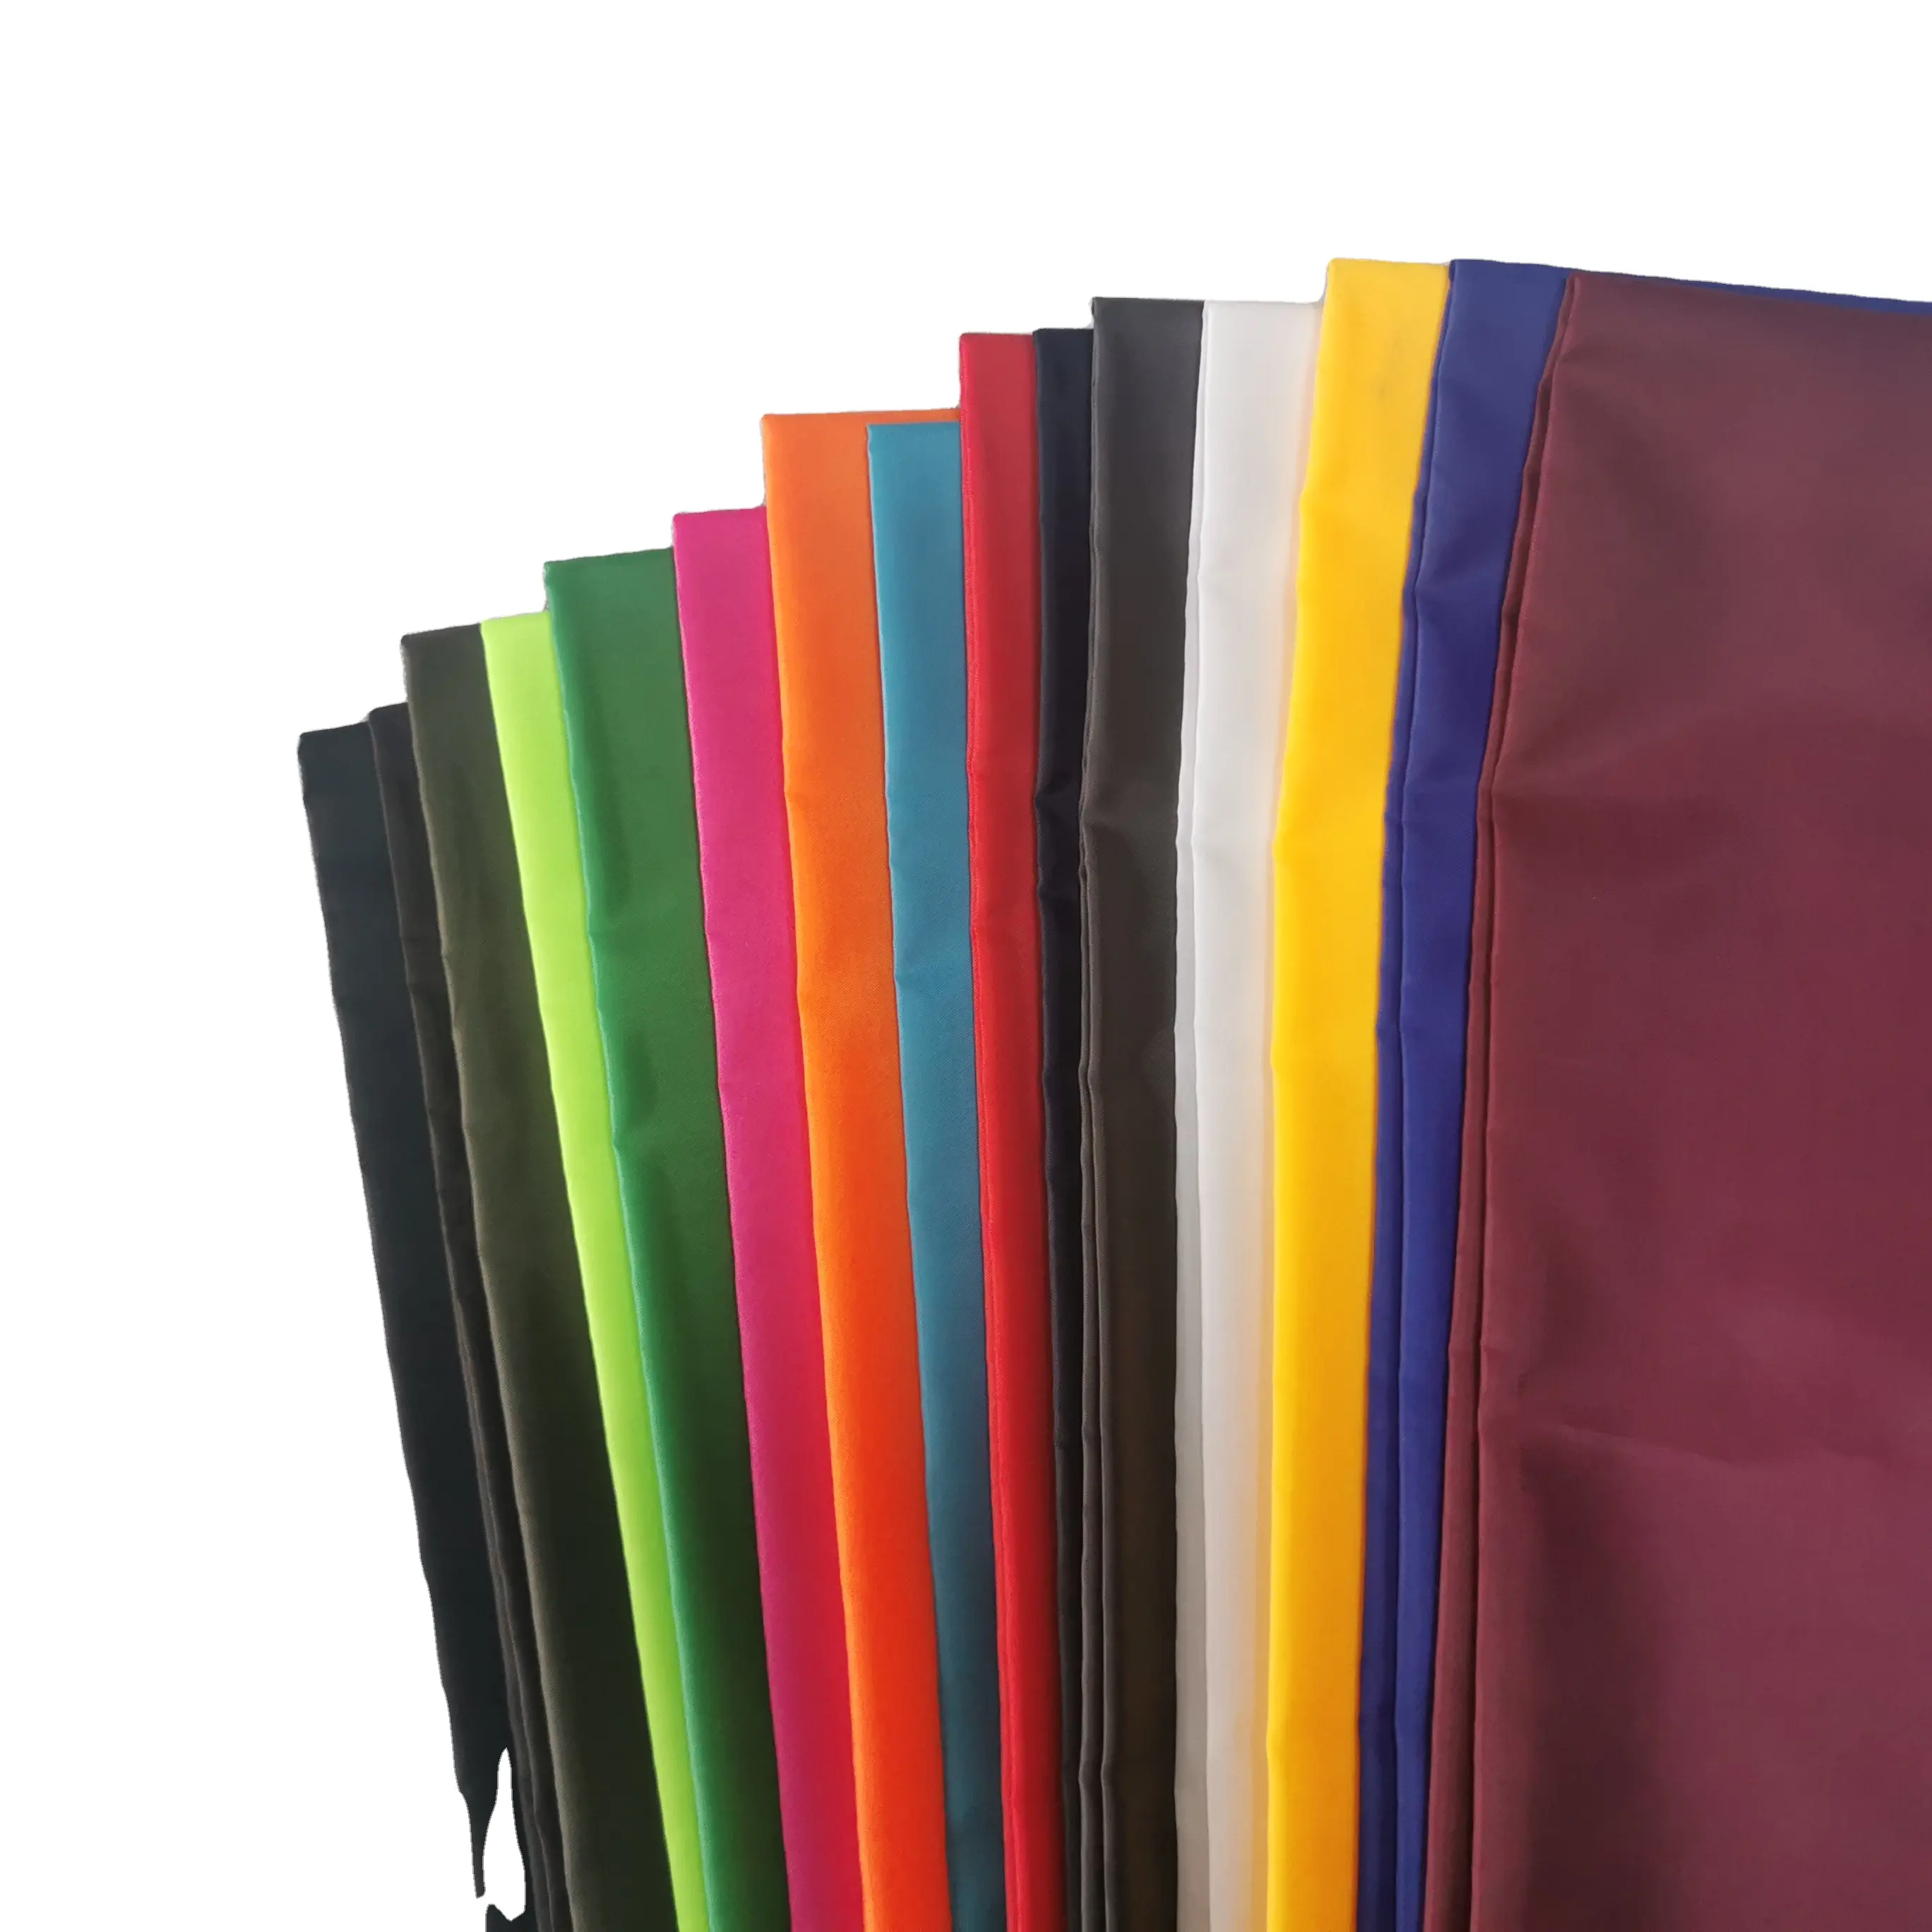 Quick deliver time 190t plain dyed 100% polyester taffeta fabric